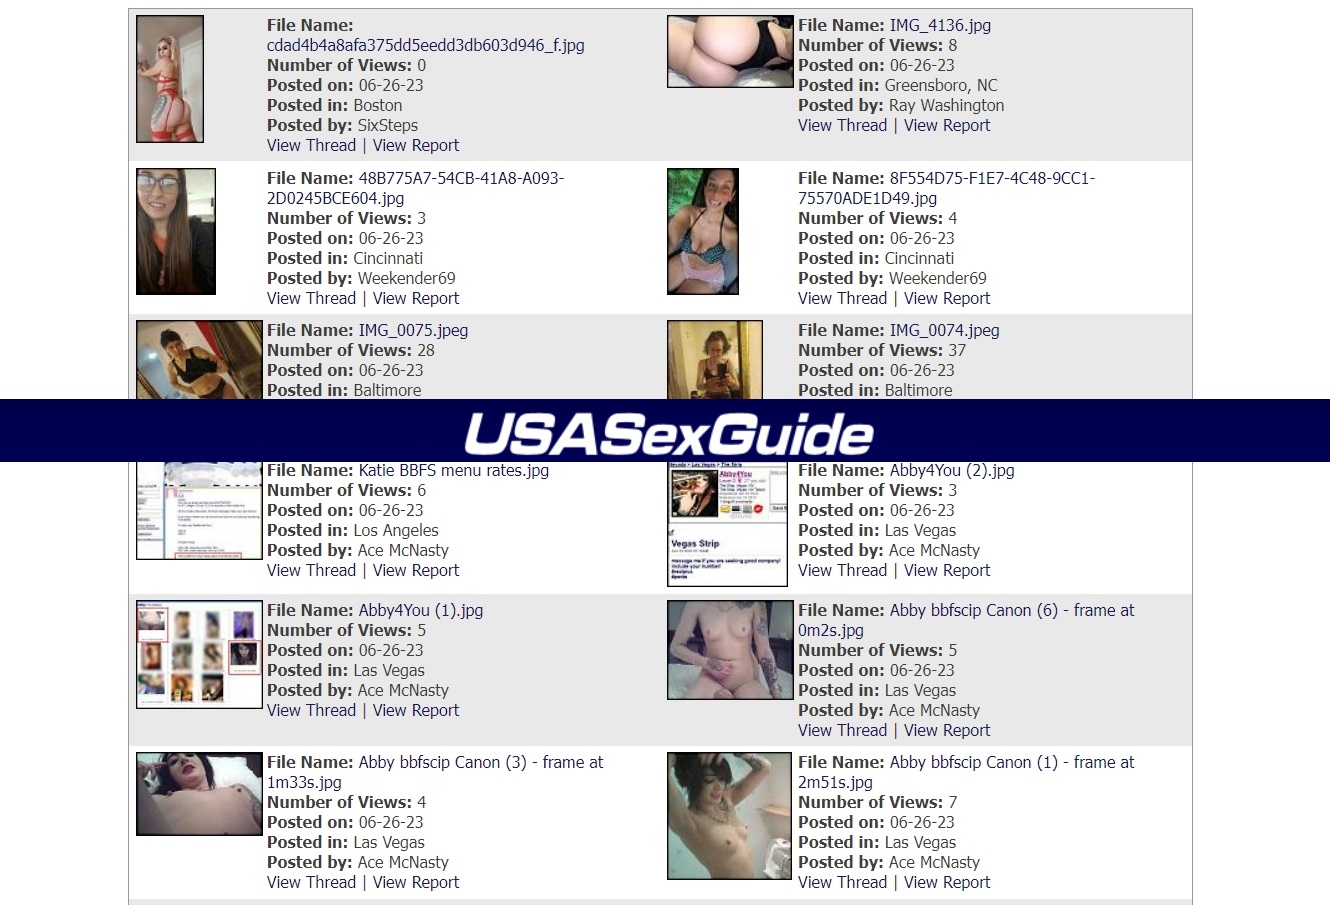 chris gascoigne recommends www usa sex guide pic